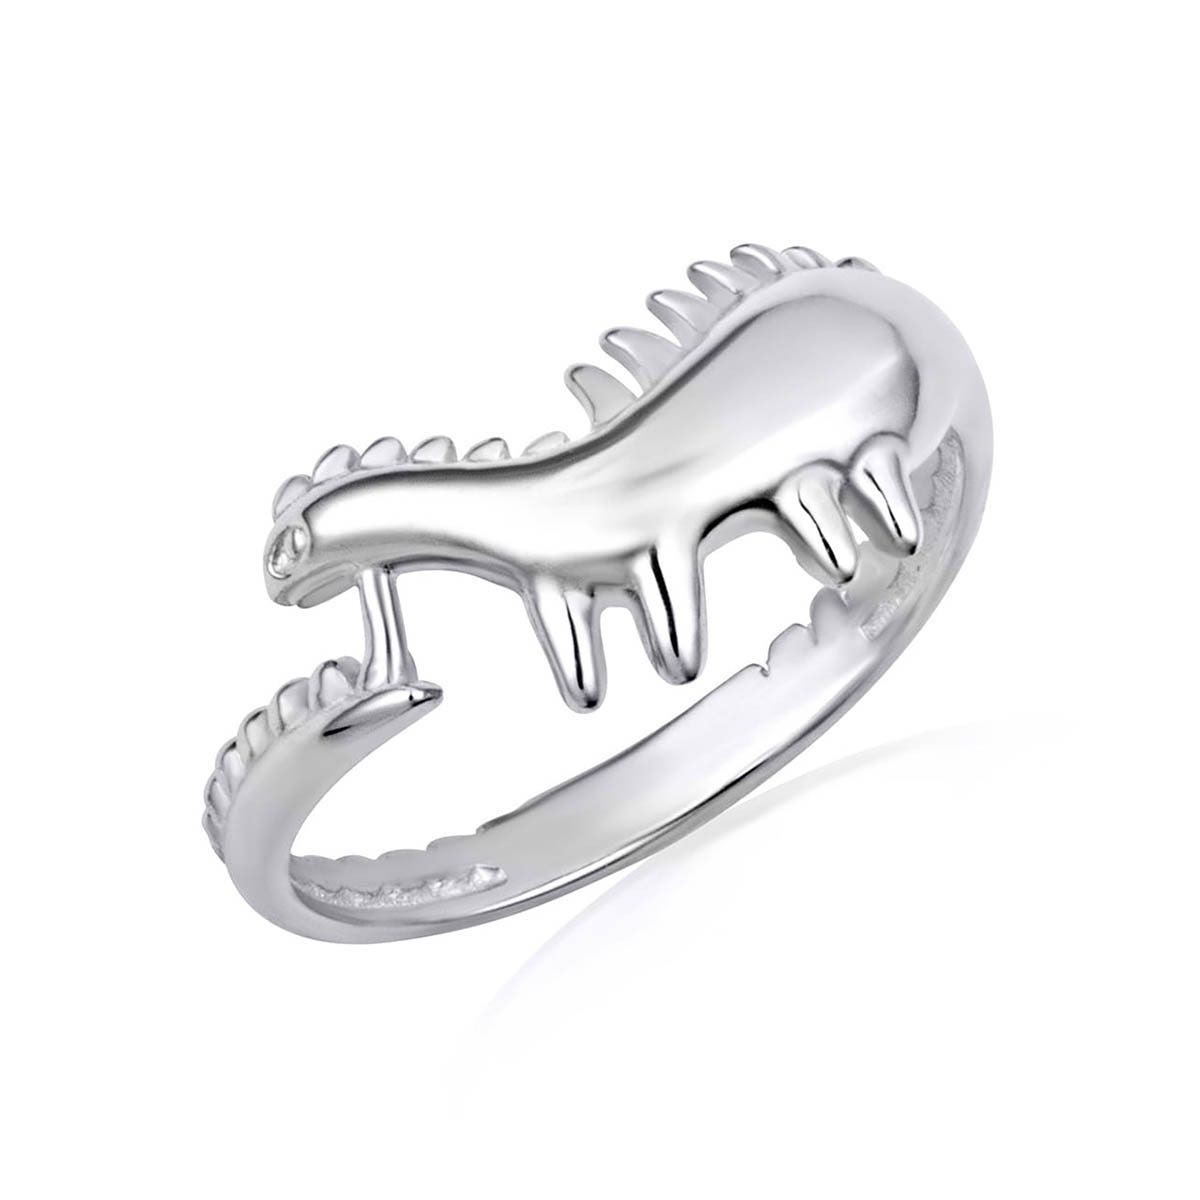 Silver - Mens Ring - Gold Boutique GOOFASH